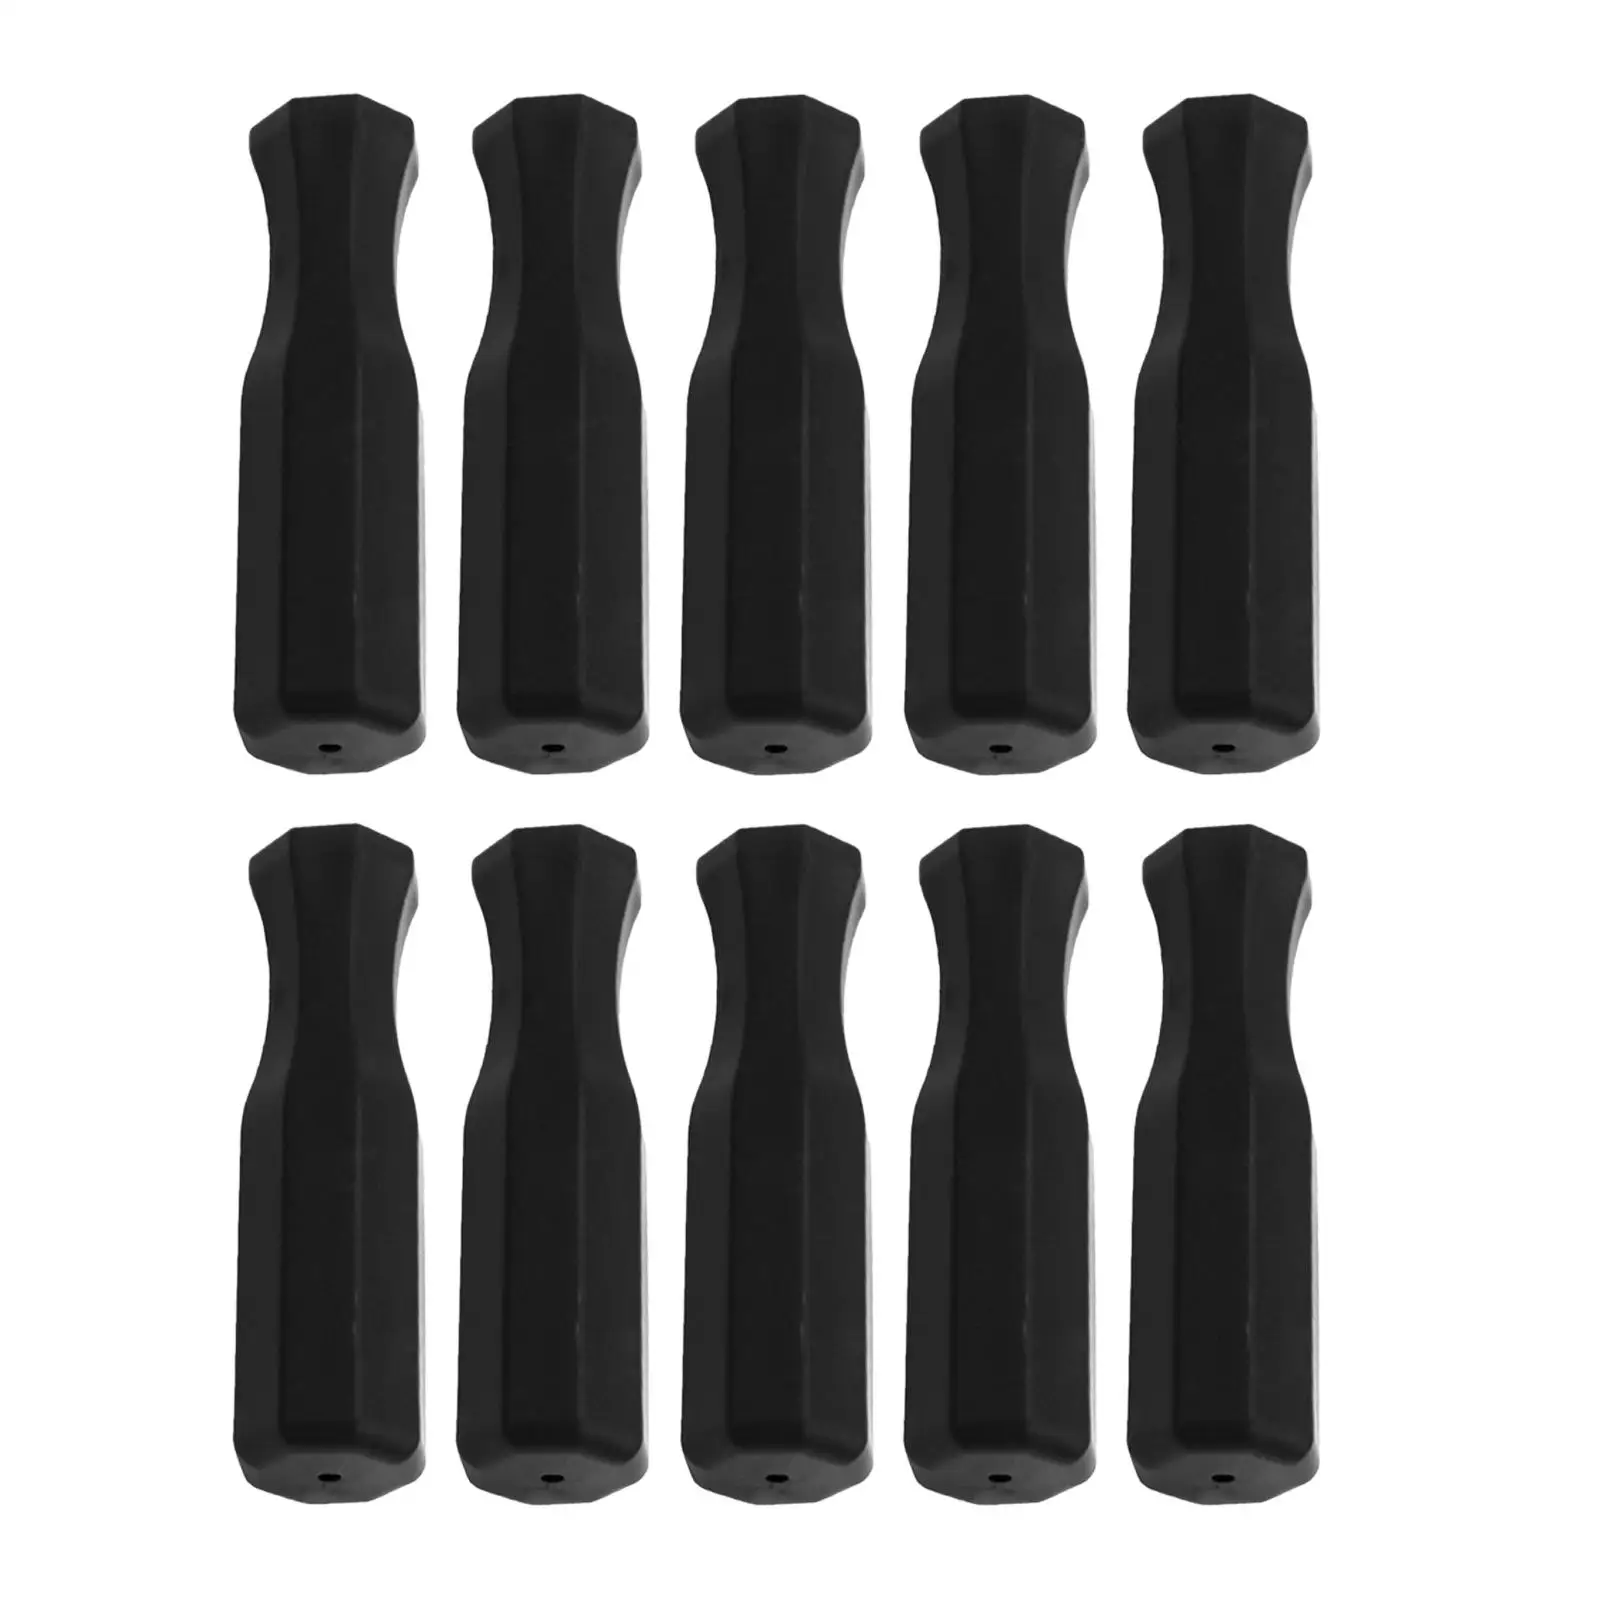 10pcs Table Soccer Parts Replacement Kids Children Football Handle Grip Tabletop Soccer Game Accessories